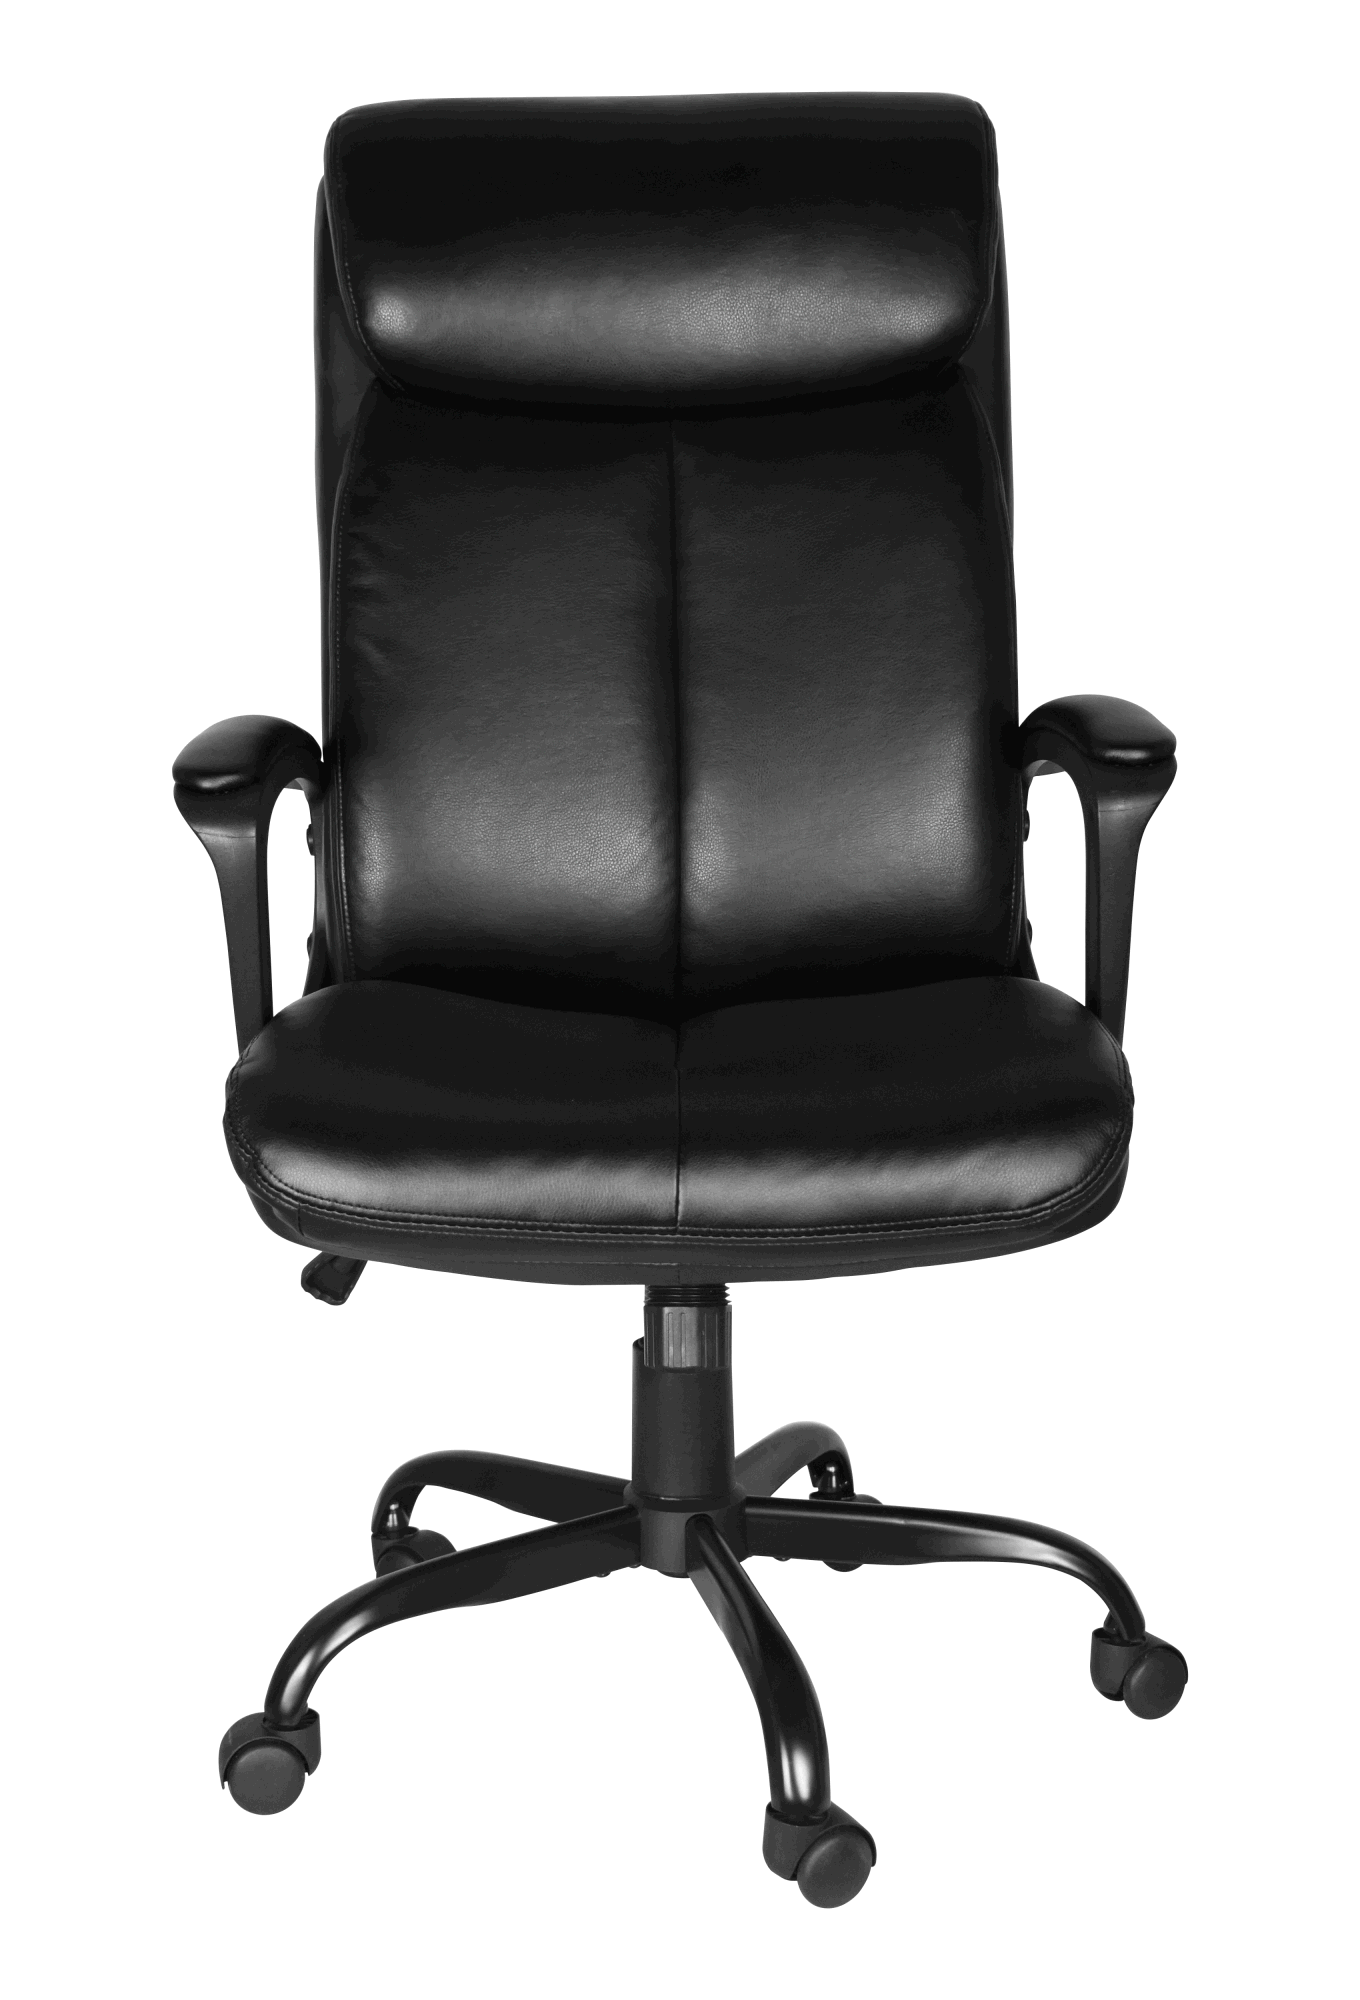 Free Shipping soft Padded Mid-Back Office Computer Desk Chair with Armrest; Leather office Chair ; PU faux leather;  till function 90-110 degree; black color max uploaded 300LBS